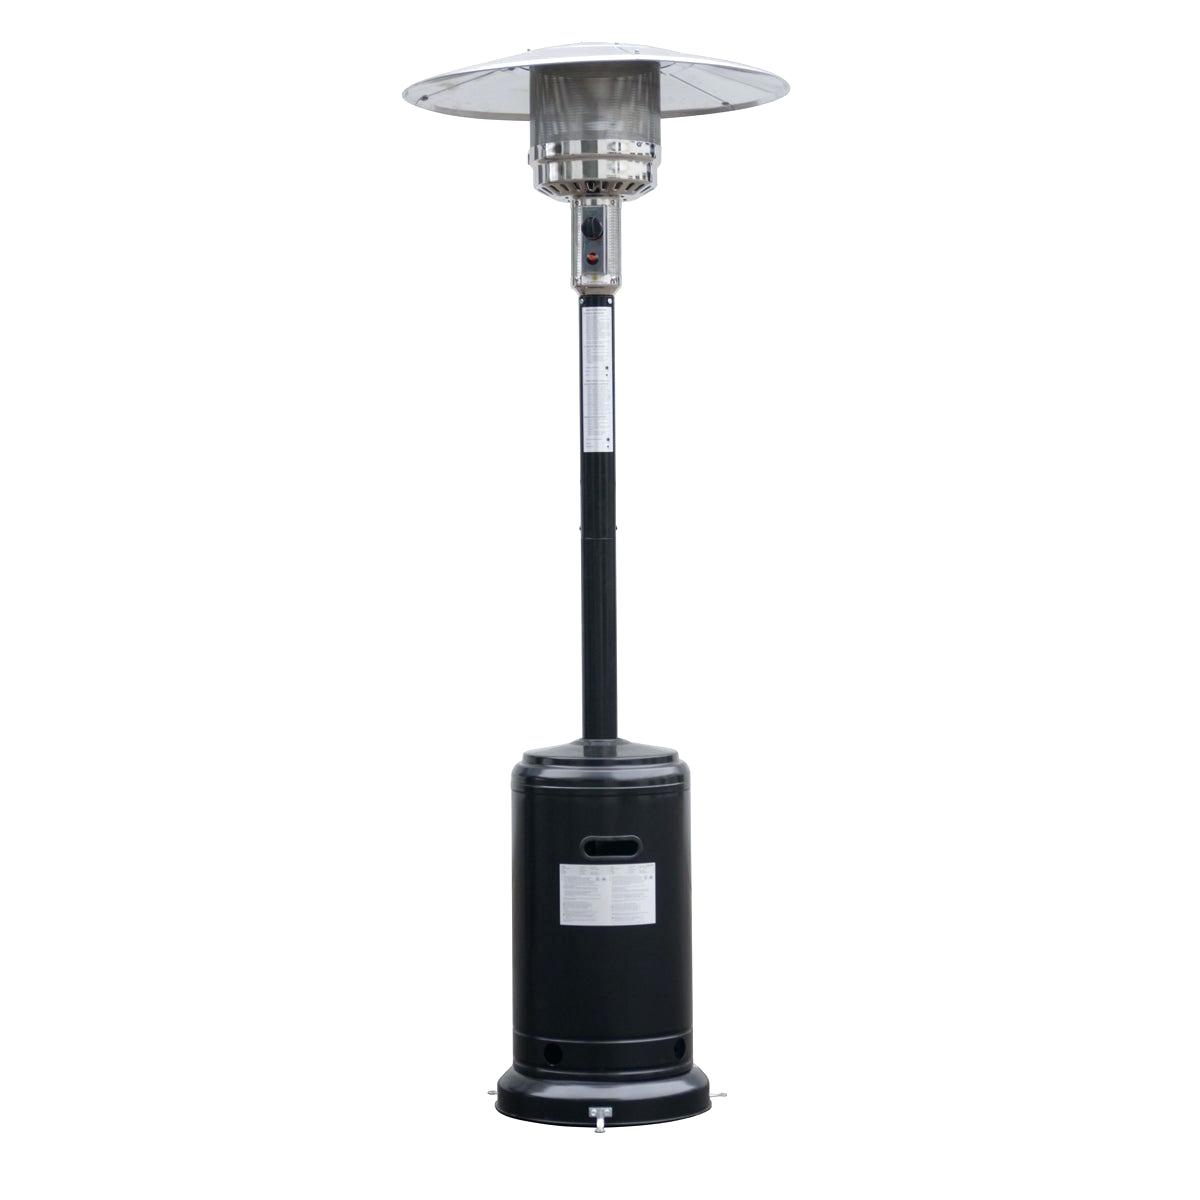 Steel Outdoor Patio Heater Propane Gas W Accessories Black pertaining to proportions 1200 X 1200